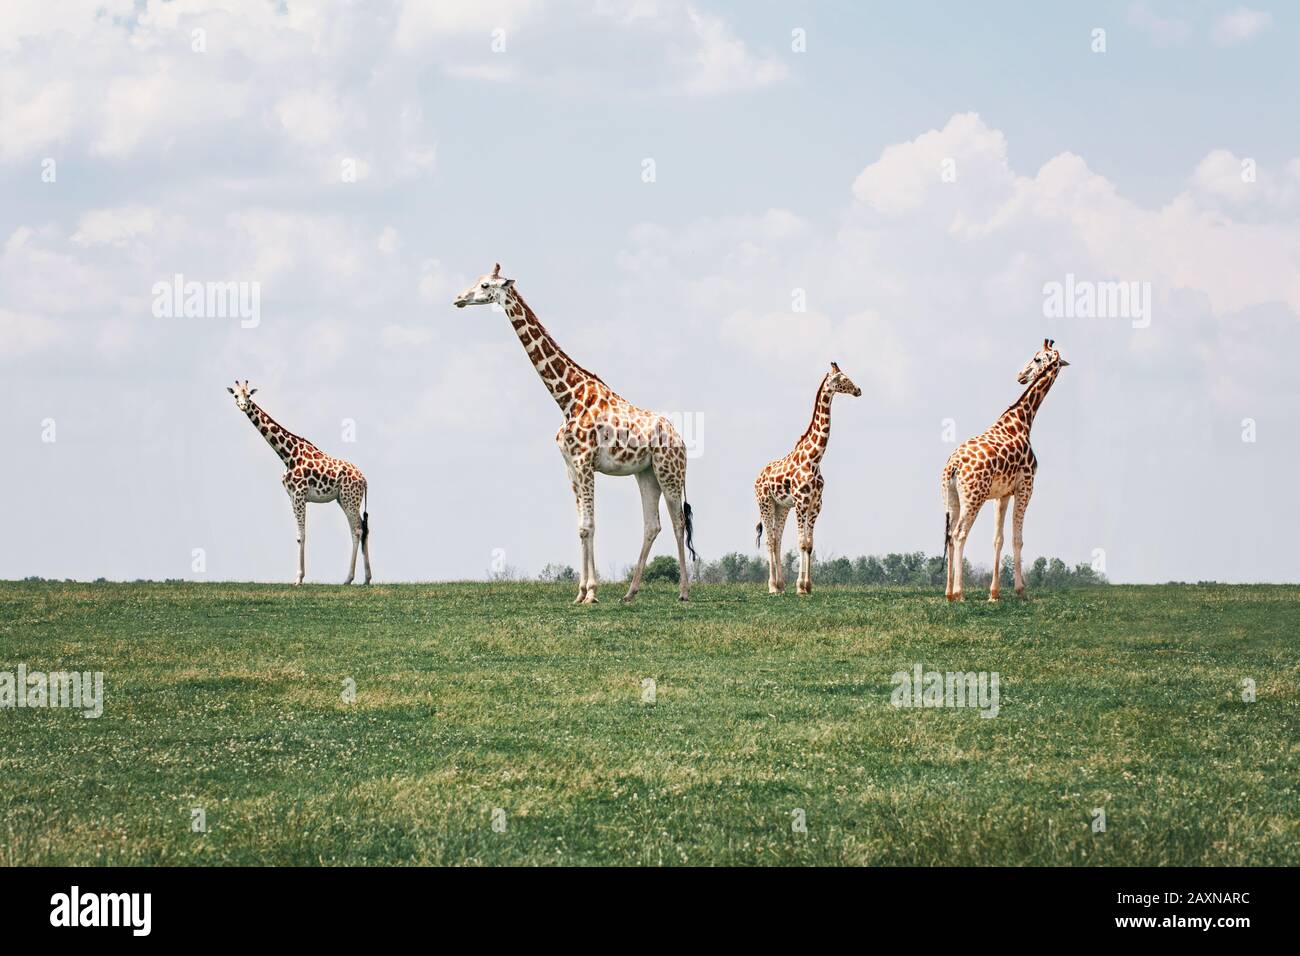 Four tall giraffes standing together in savanna park on summer day. Big exotic African animals walking on meadow looking watching around. Beauty in na Stock Photo